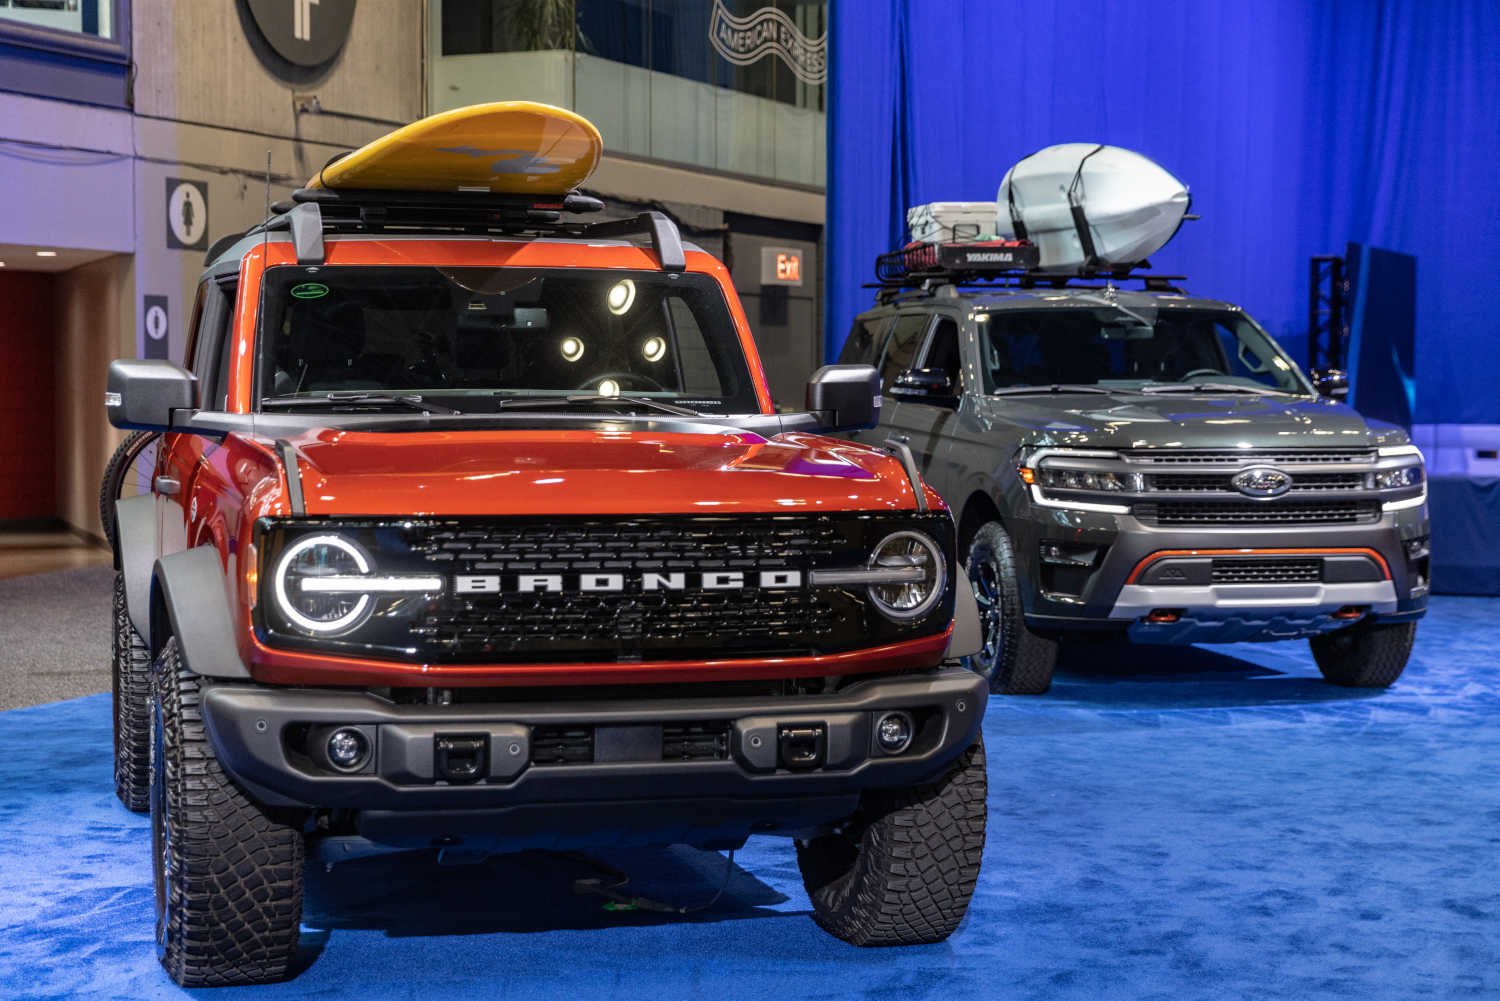 SUV drivers are very loyal, especially in Ford SUVs like these